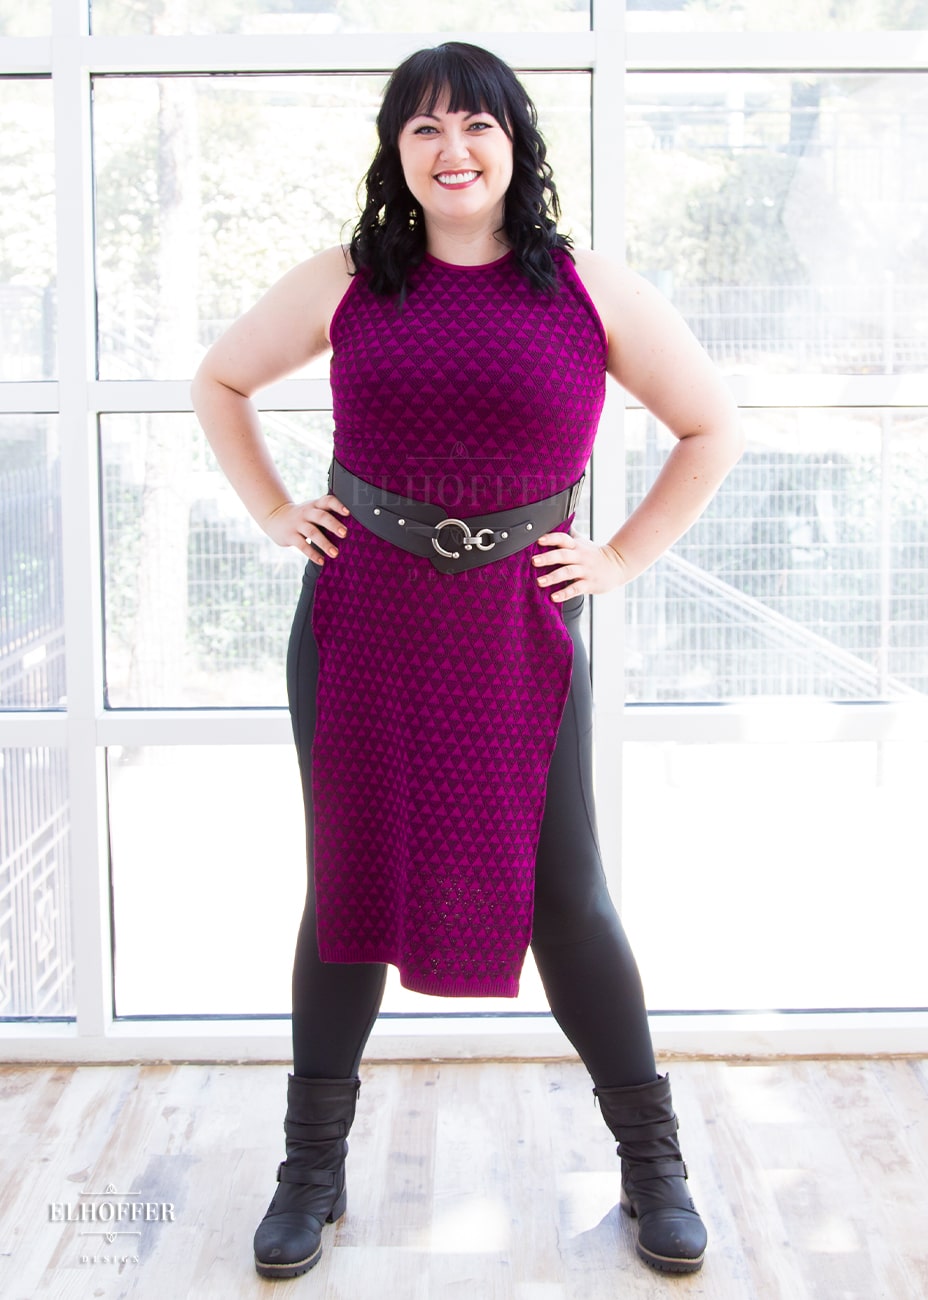 Bernadette, a fair skinned size large model with short black hair and bangs, is wearing a pullover cropped sleeveless knit top with front and back flaps in a magenta triangle knit.